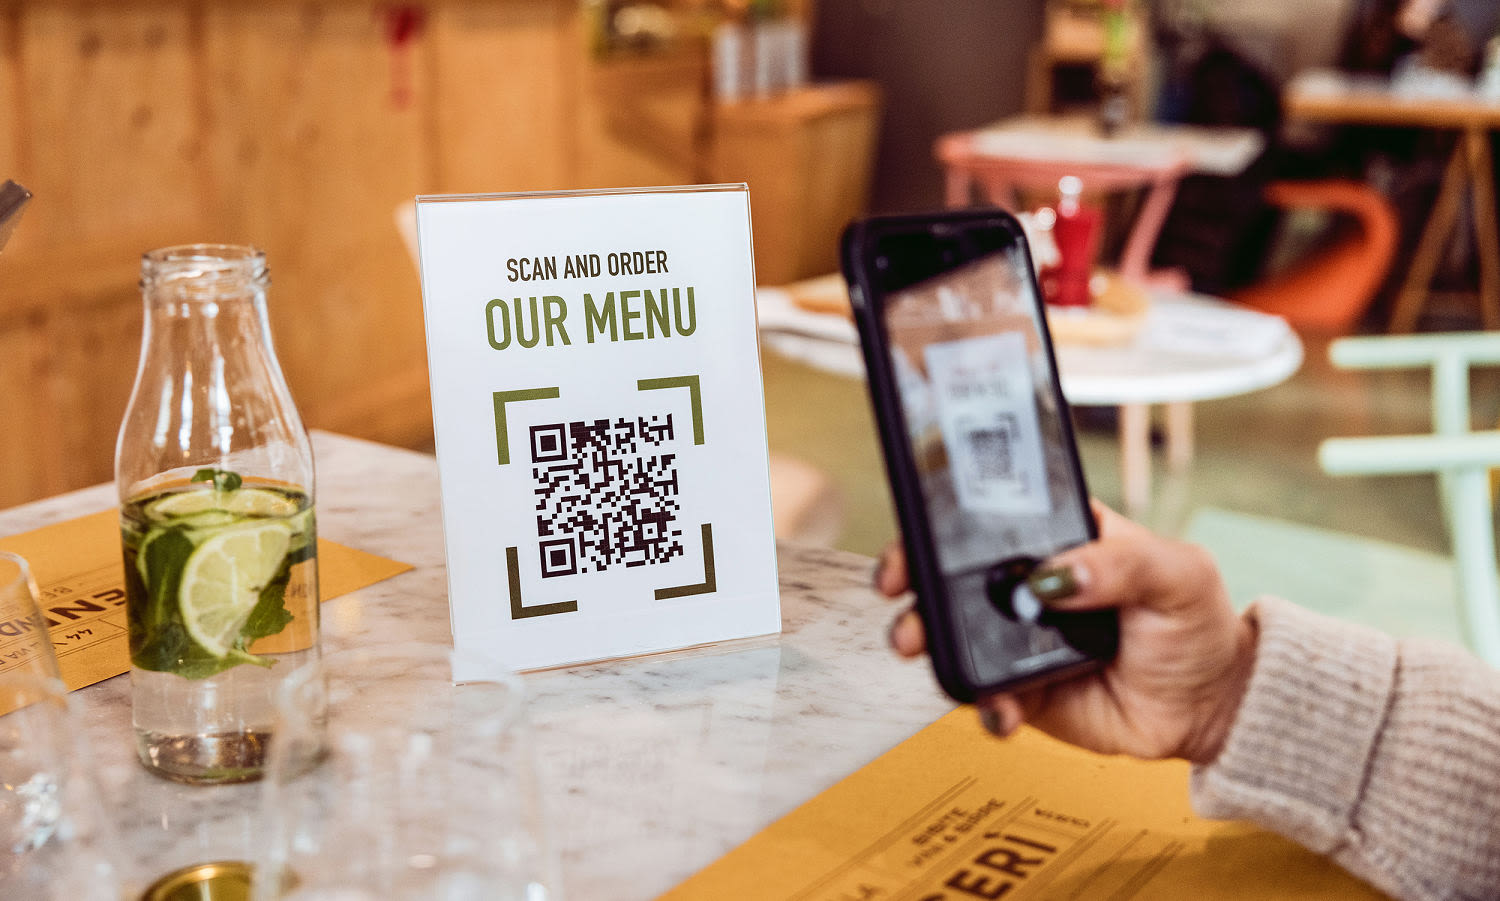 Do you prefer printed menus, or QR codes? As some restaurants make the switch, the internet is divided